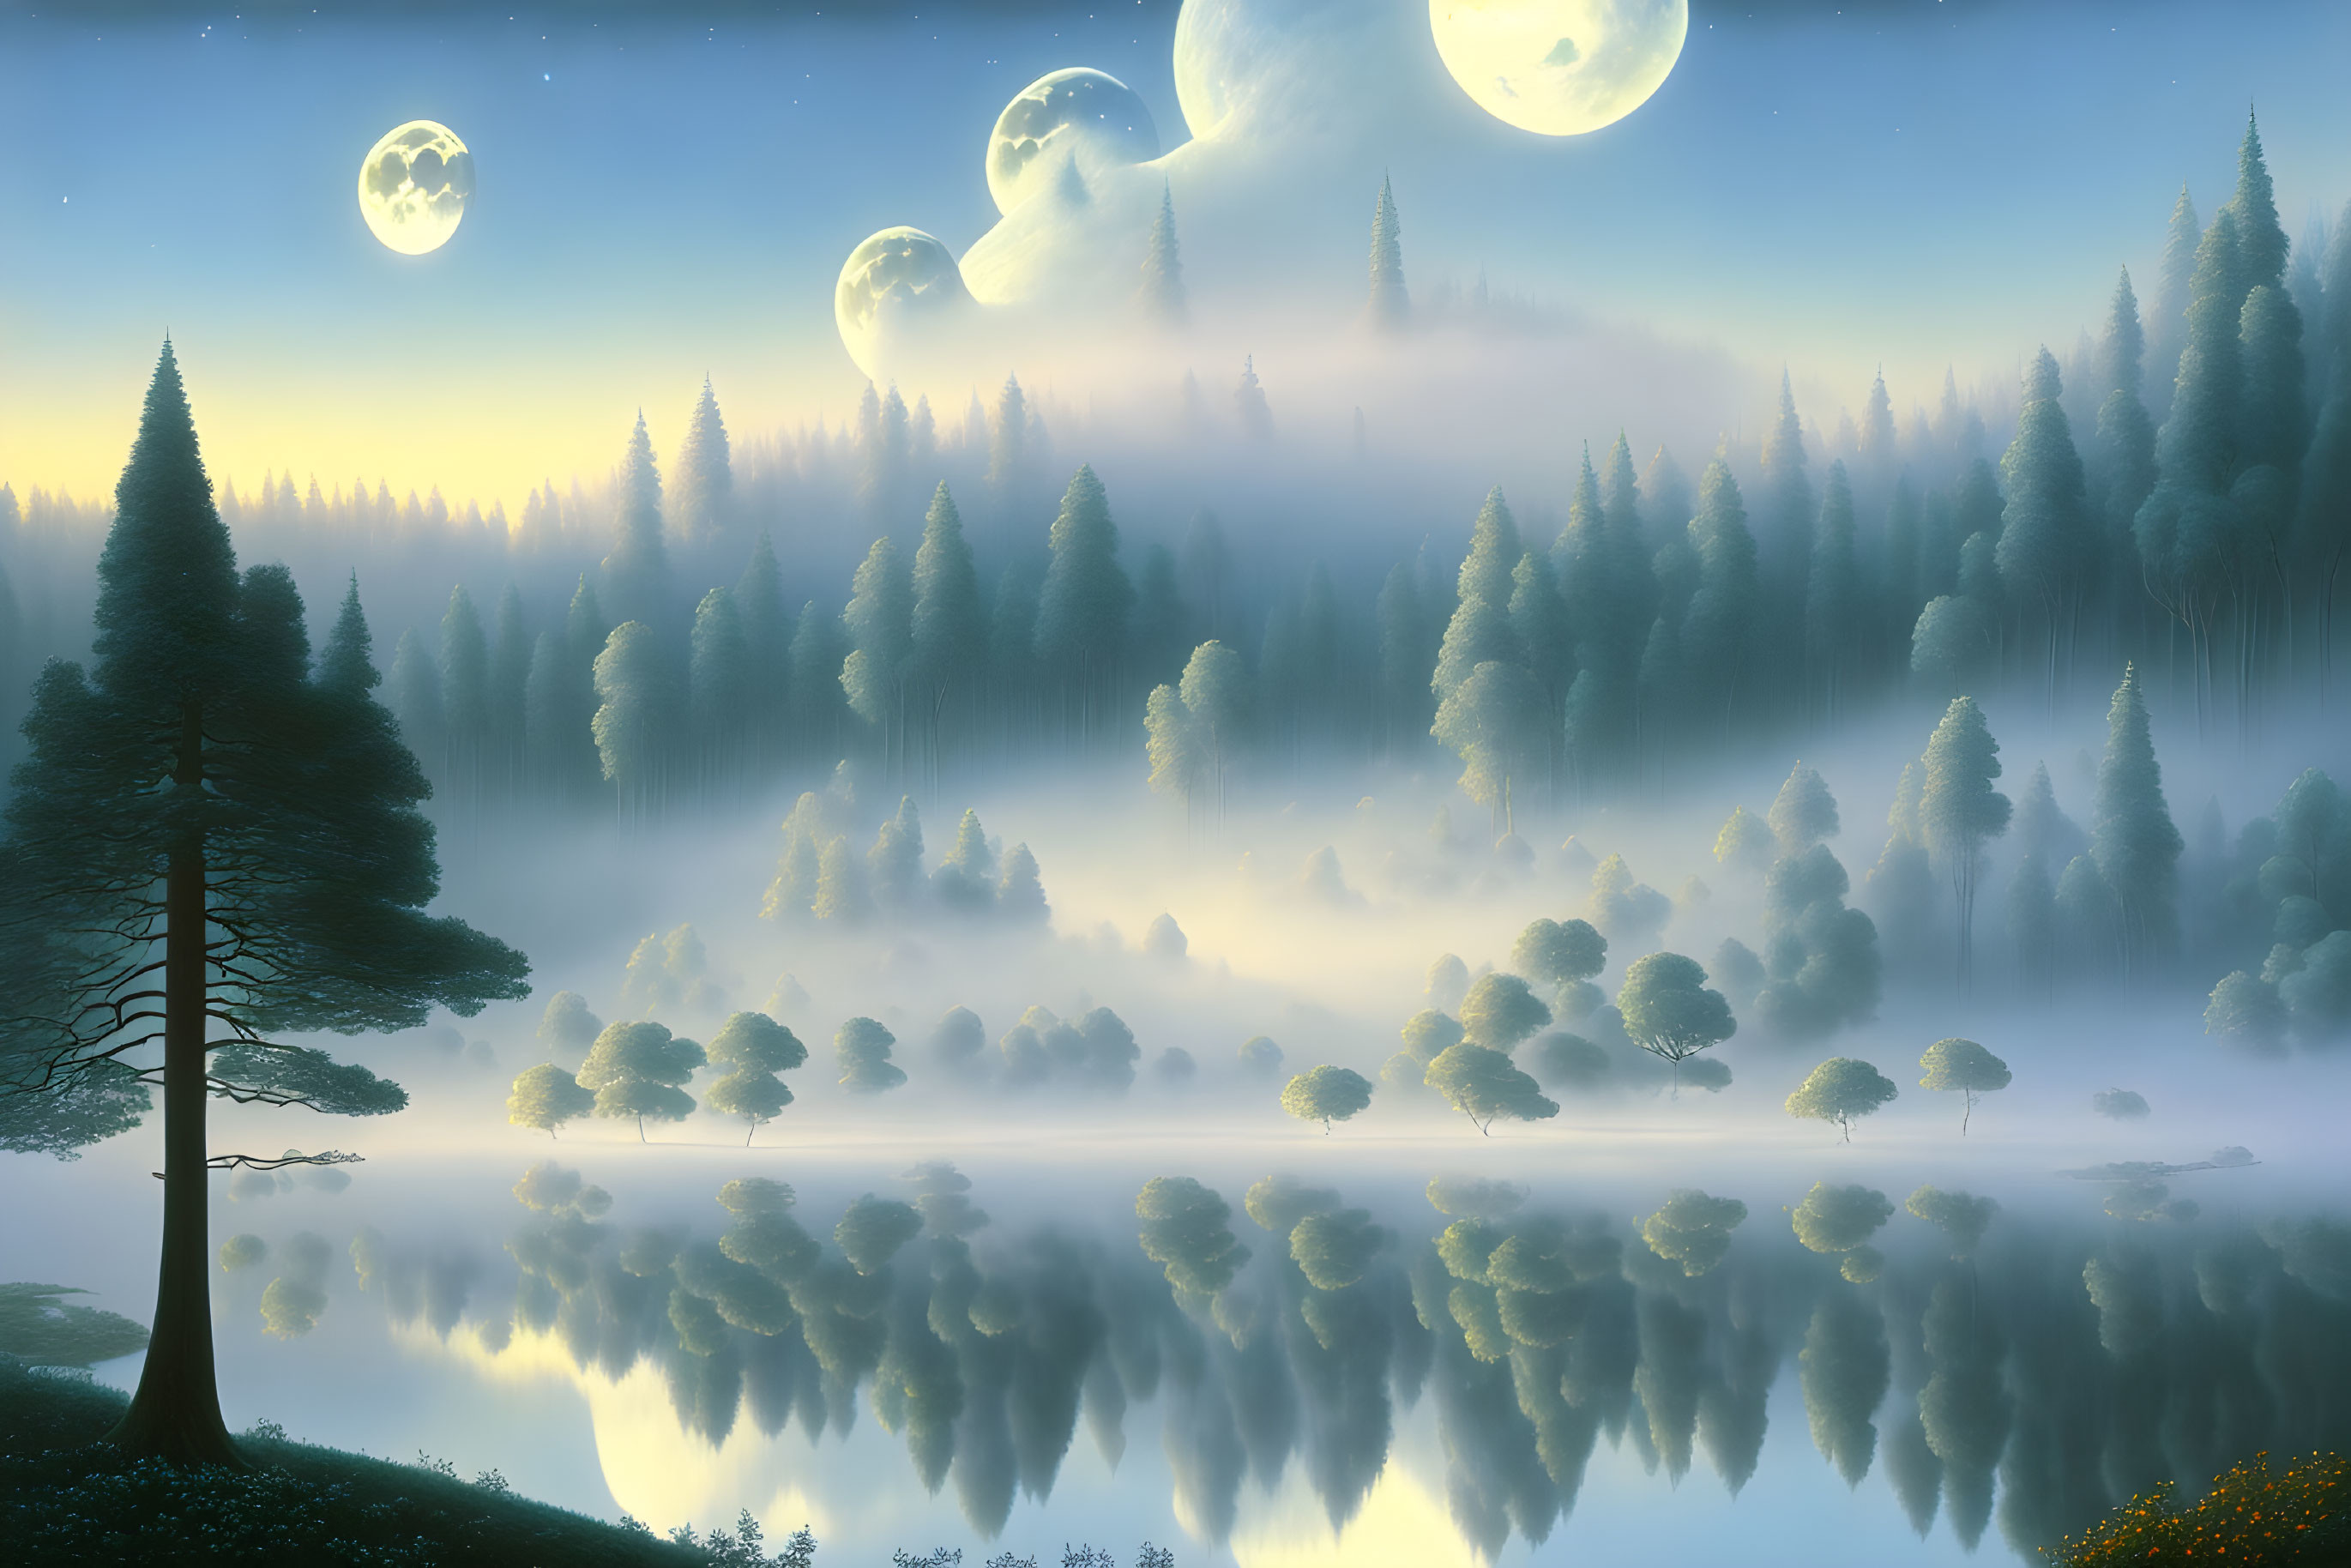 Misty forest reflected in lake under multiple moons